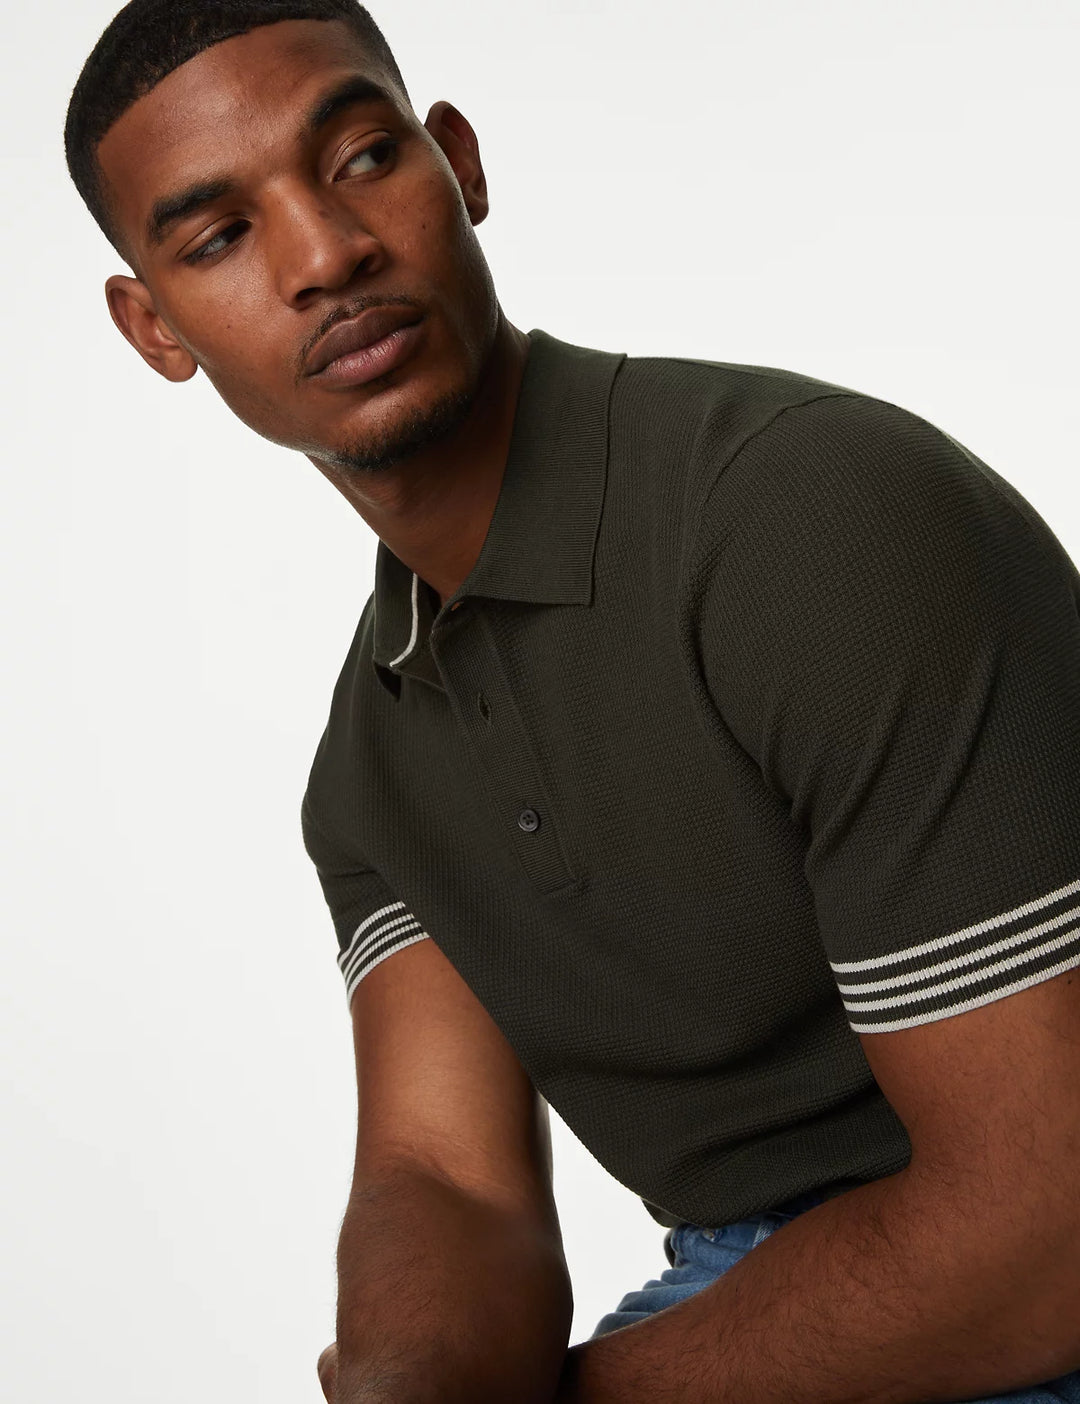 M&S Mens S/S Polo T30/4197M